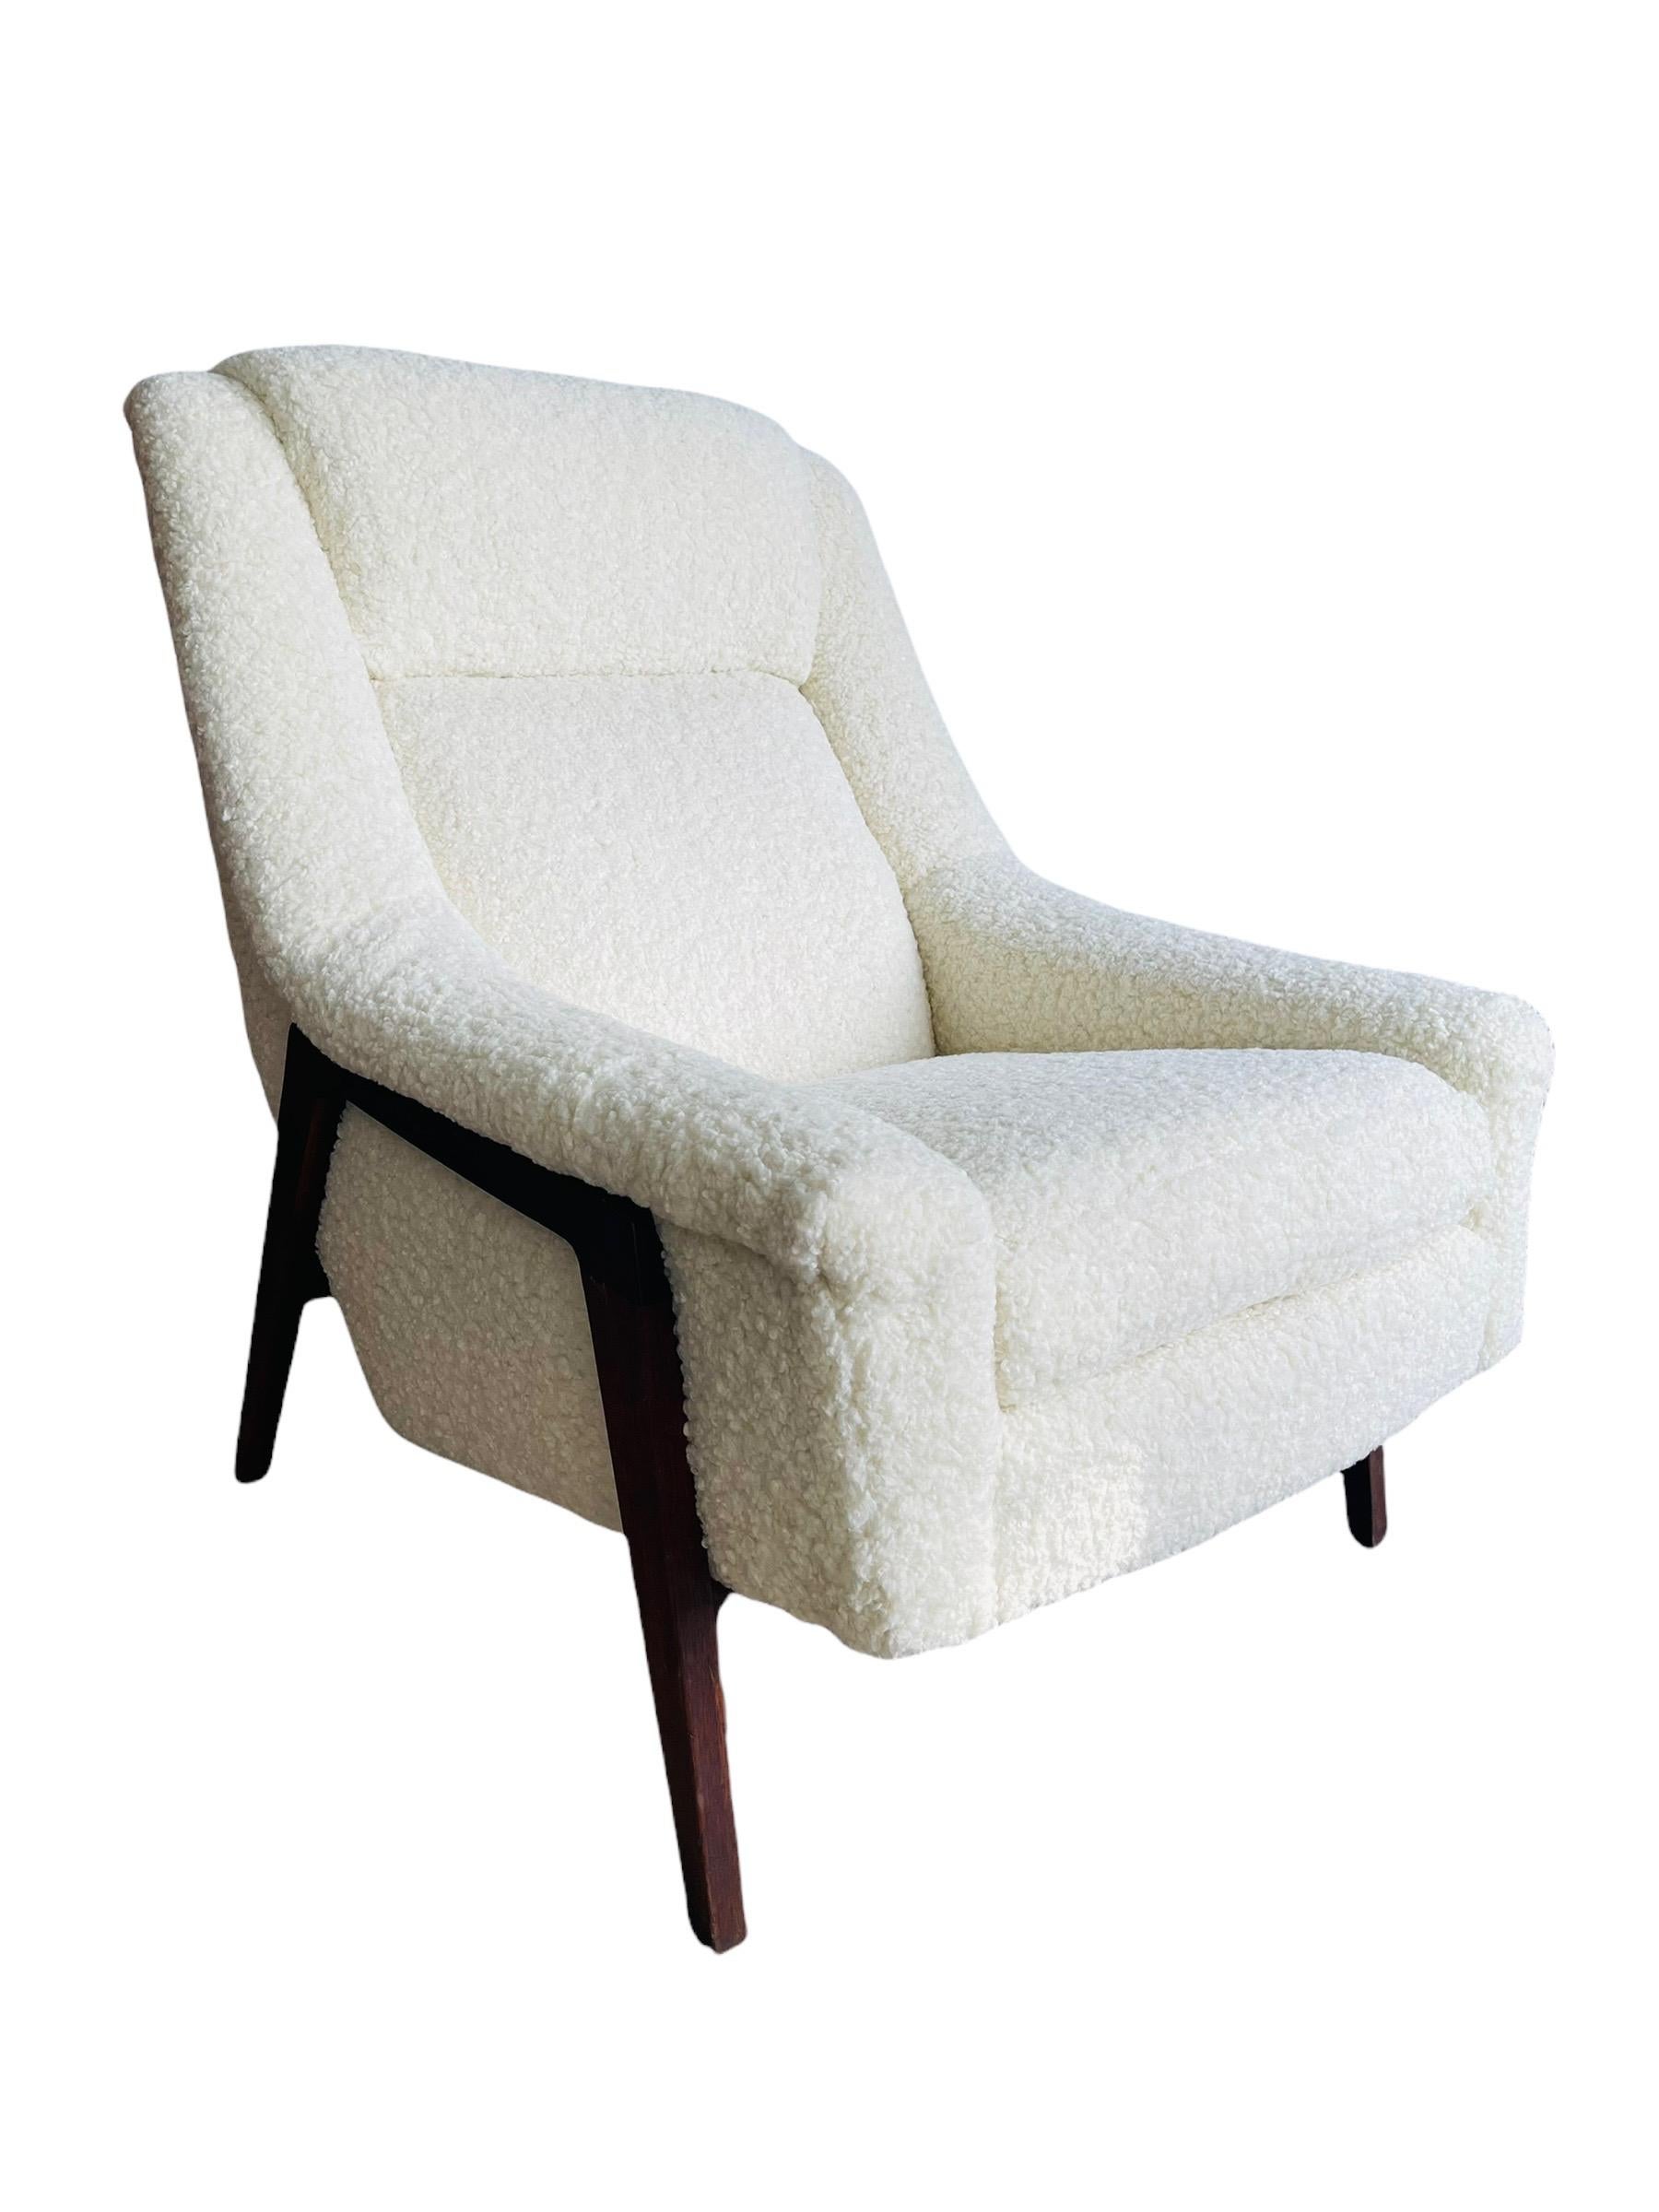 Stunning Folke Ohlsson Profil Chair Lounge Chair for DUX Boucle 1